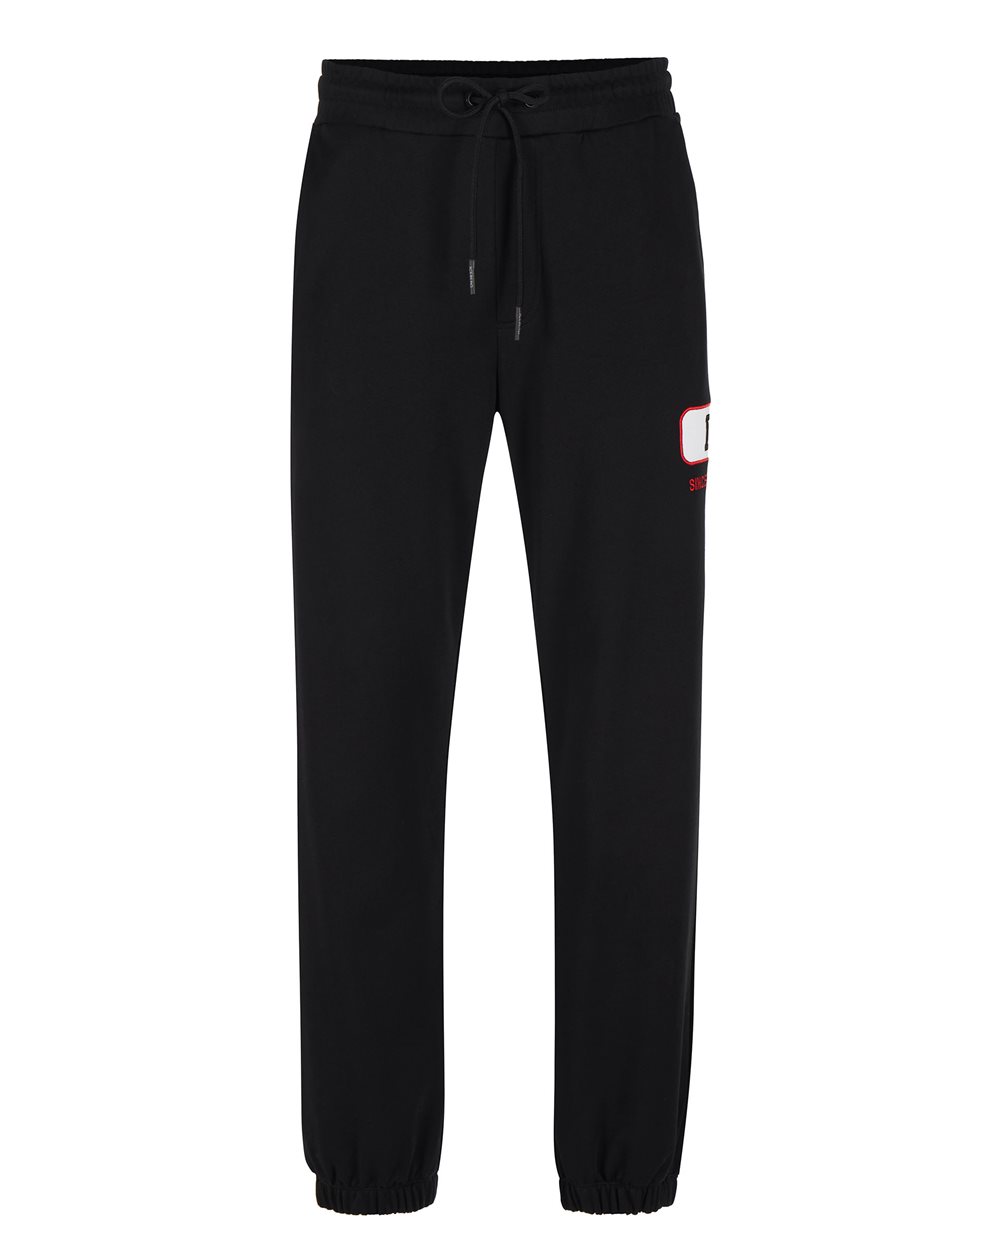 Jogging trousers with logo | Iceberg - Official Website